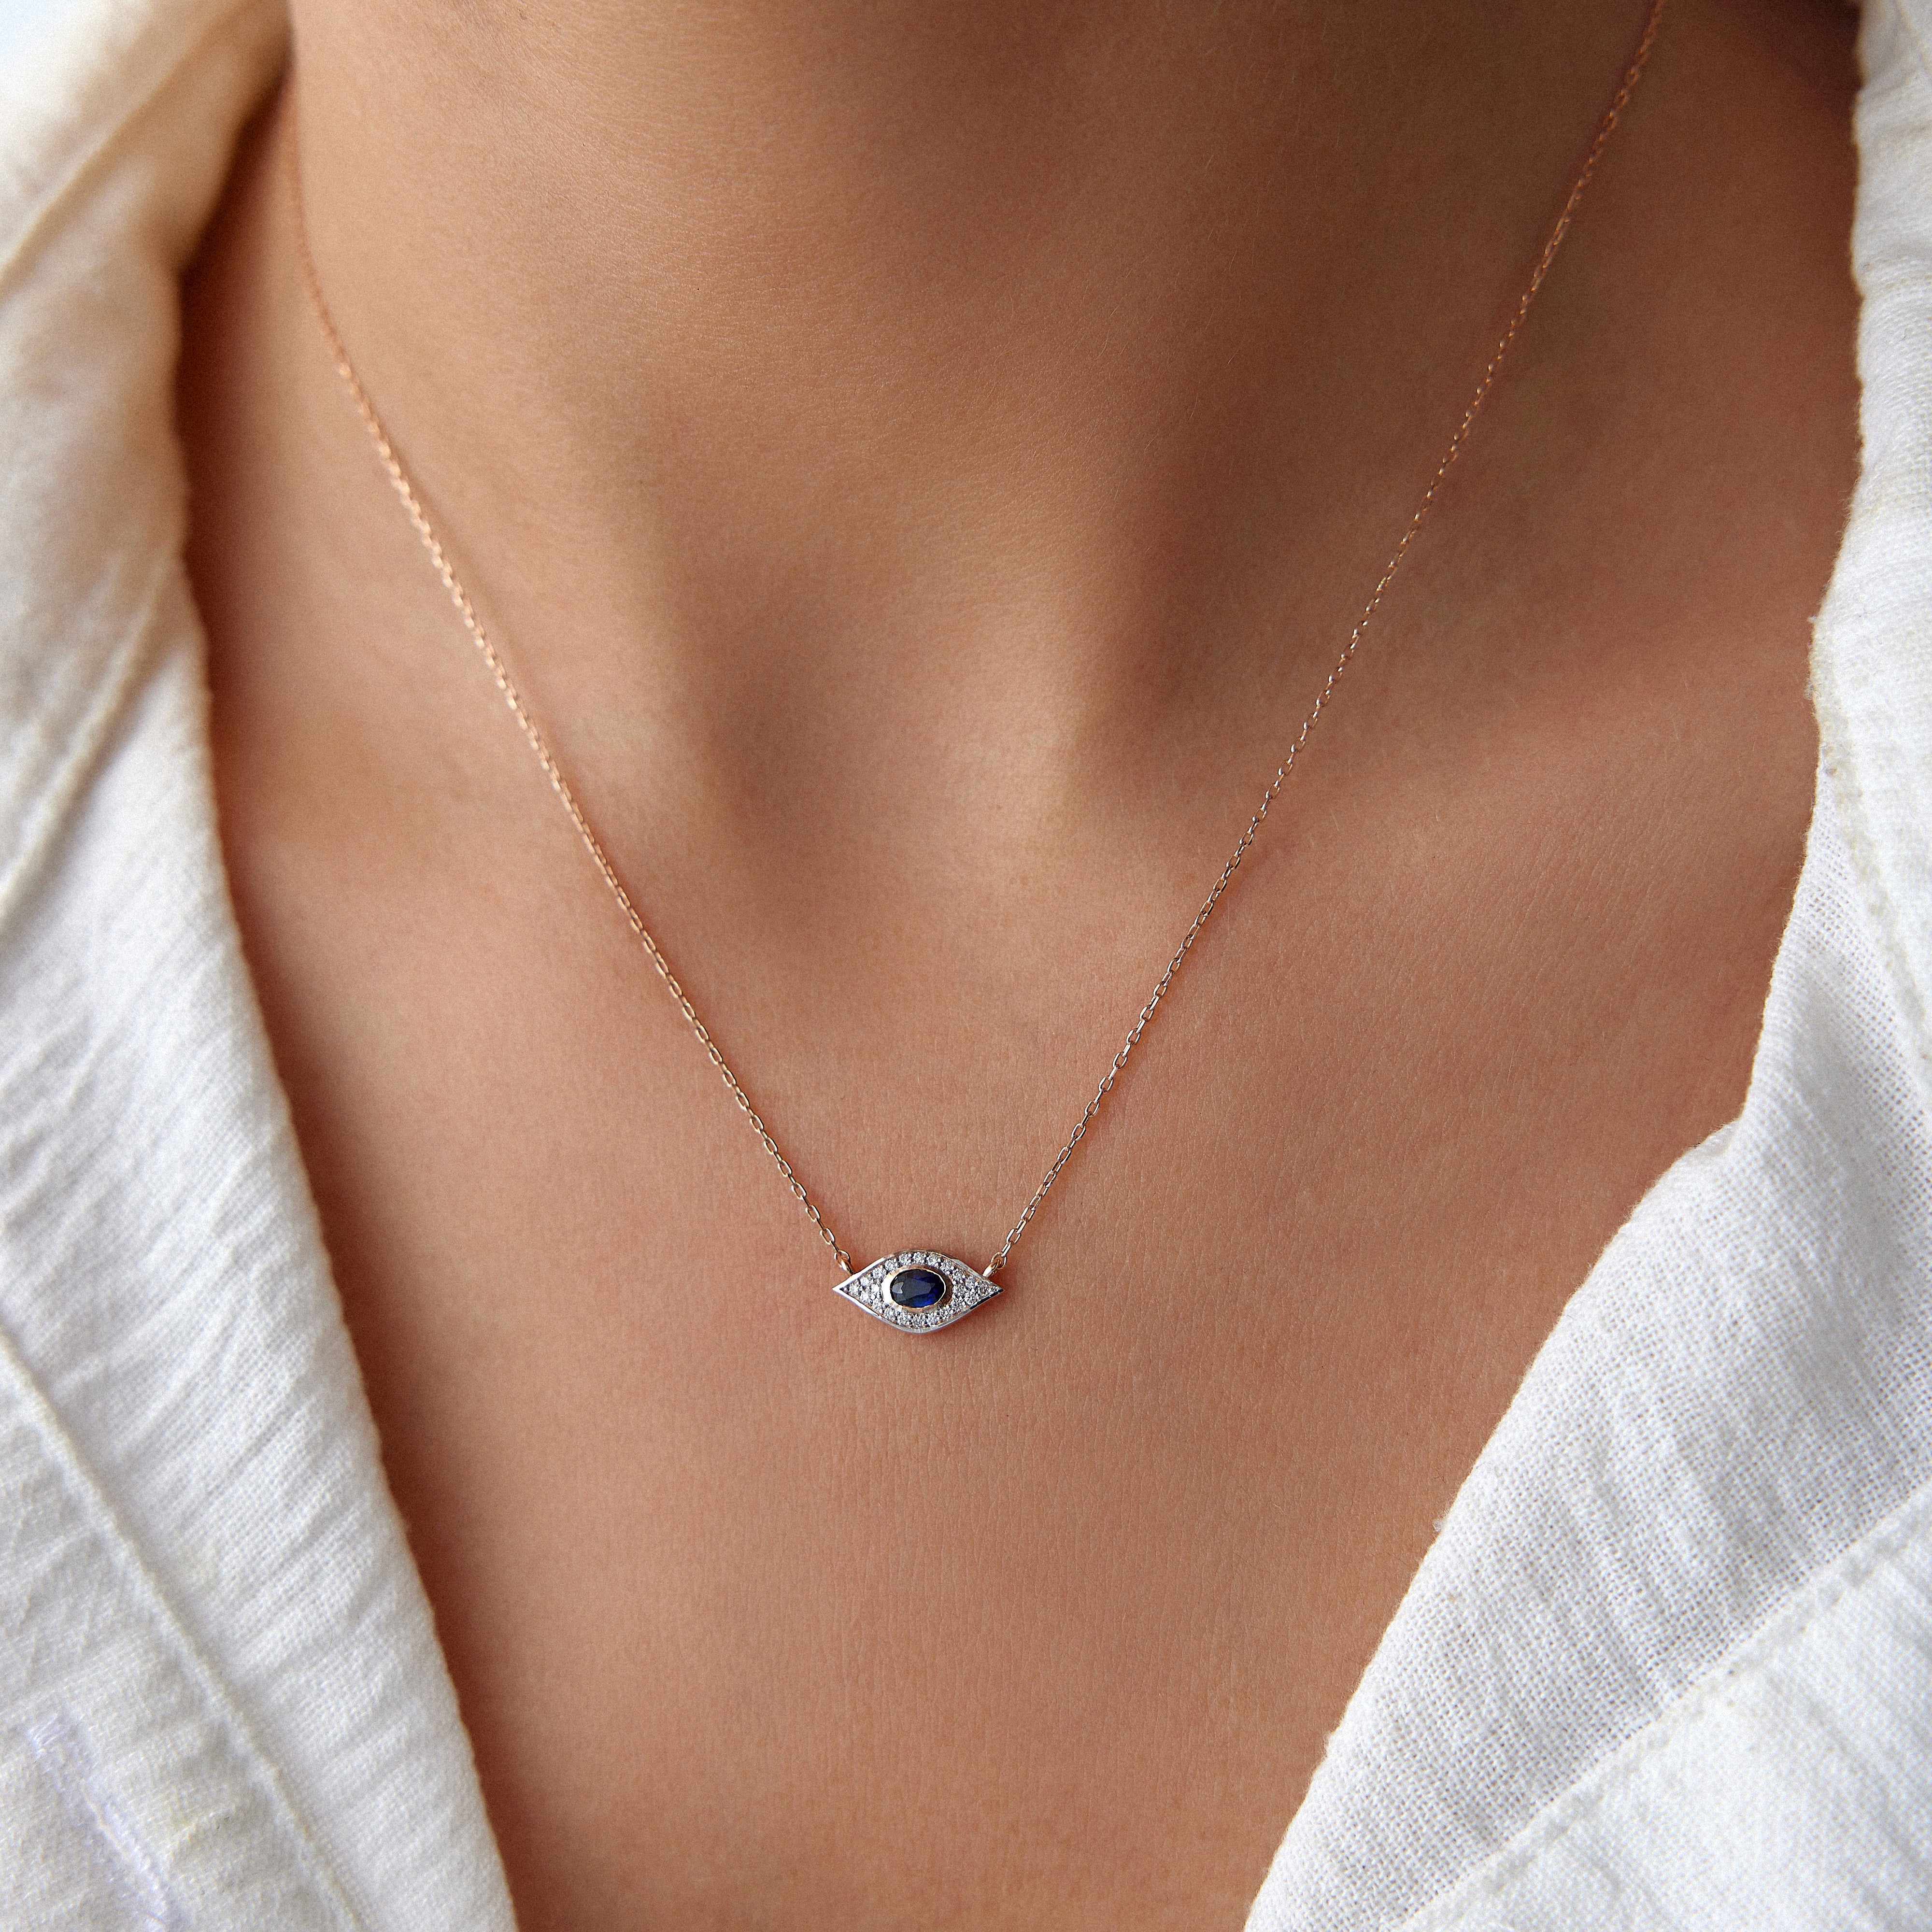 Blue Sapphire and Diamond Evil Eye Necklace Available in 14K and 18K Gold